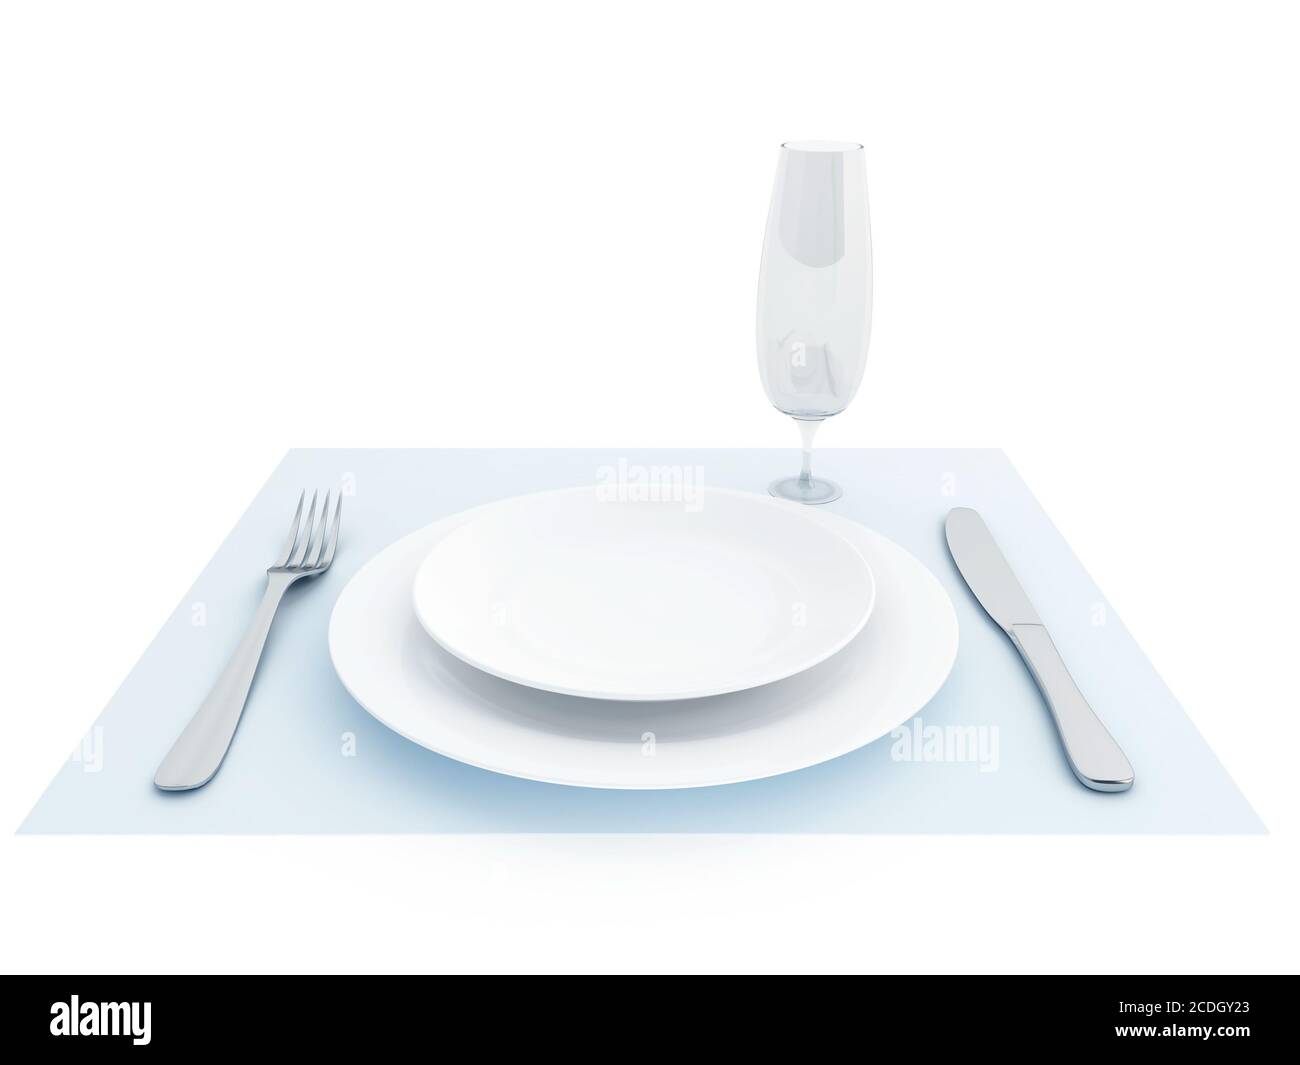 Clean plate, fork, knife and a glass for a dinner Stock Photo